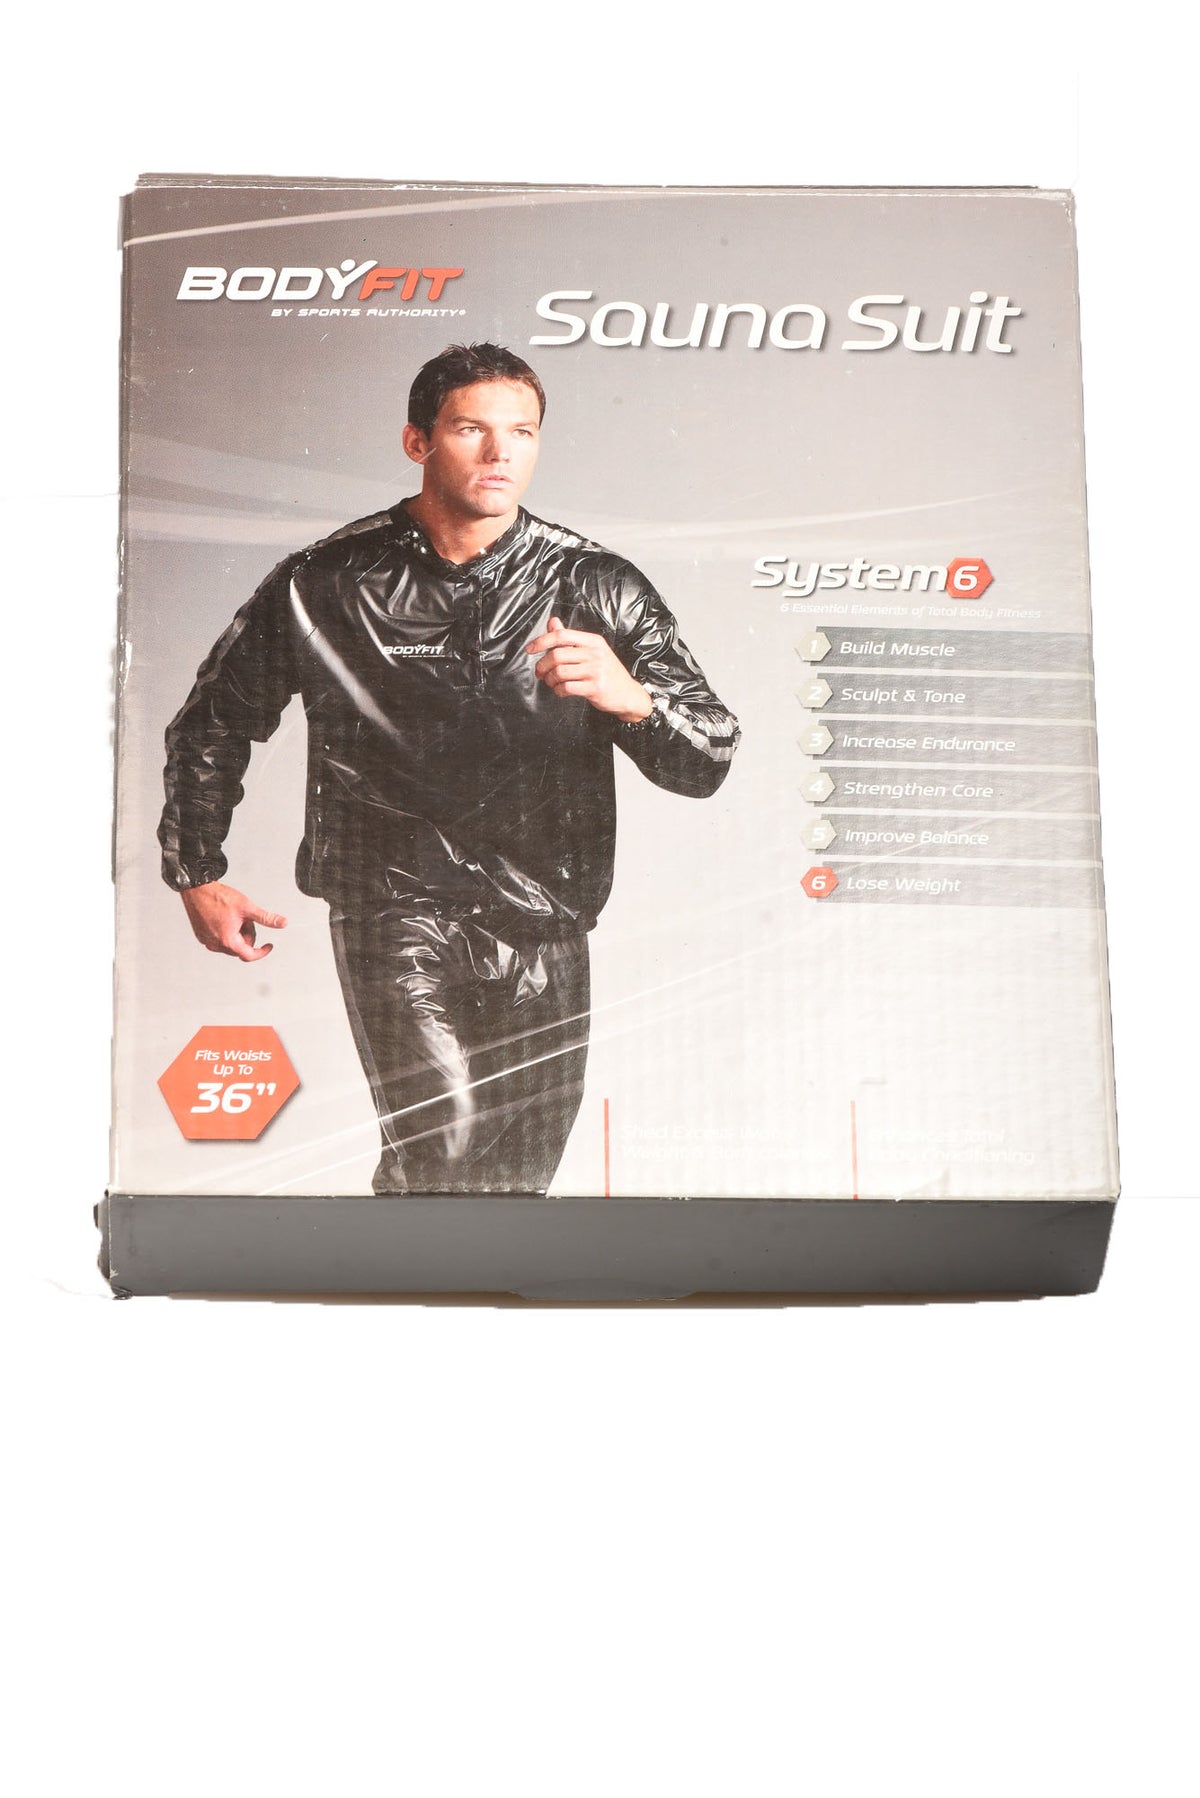 Sauna Suit By Body Fit By Sports Authority